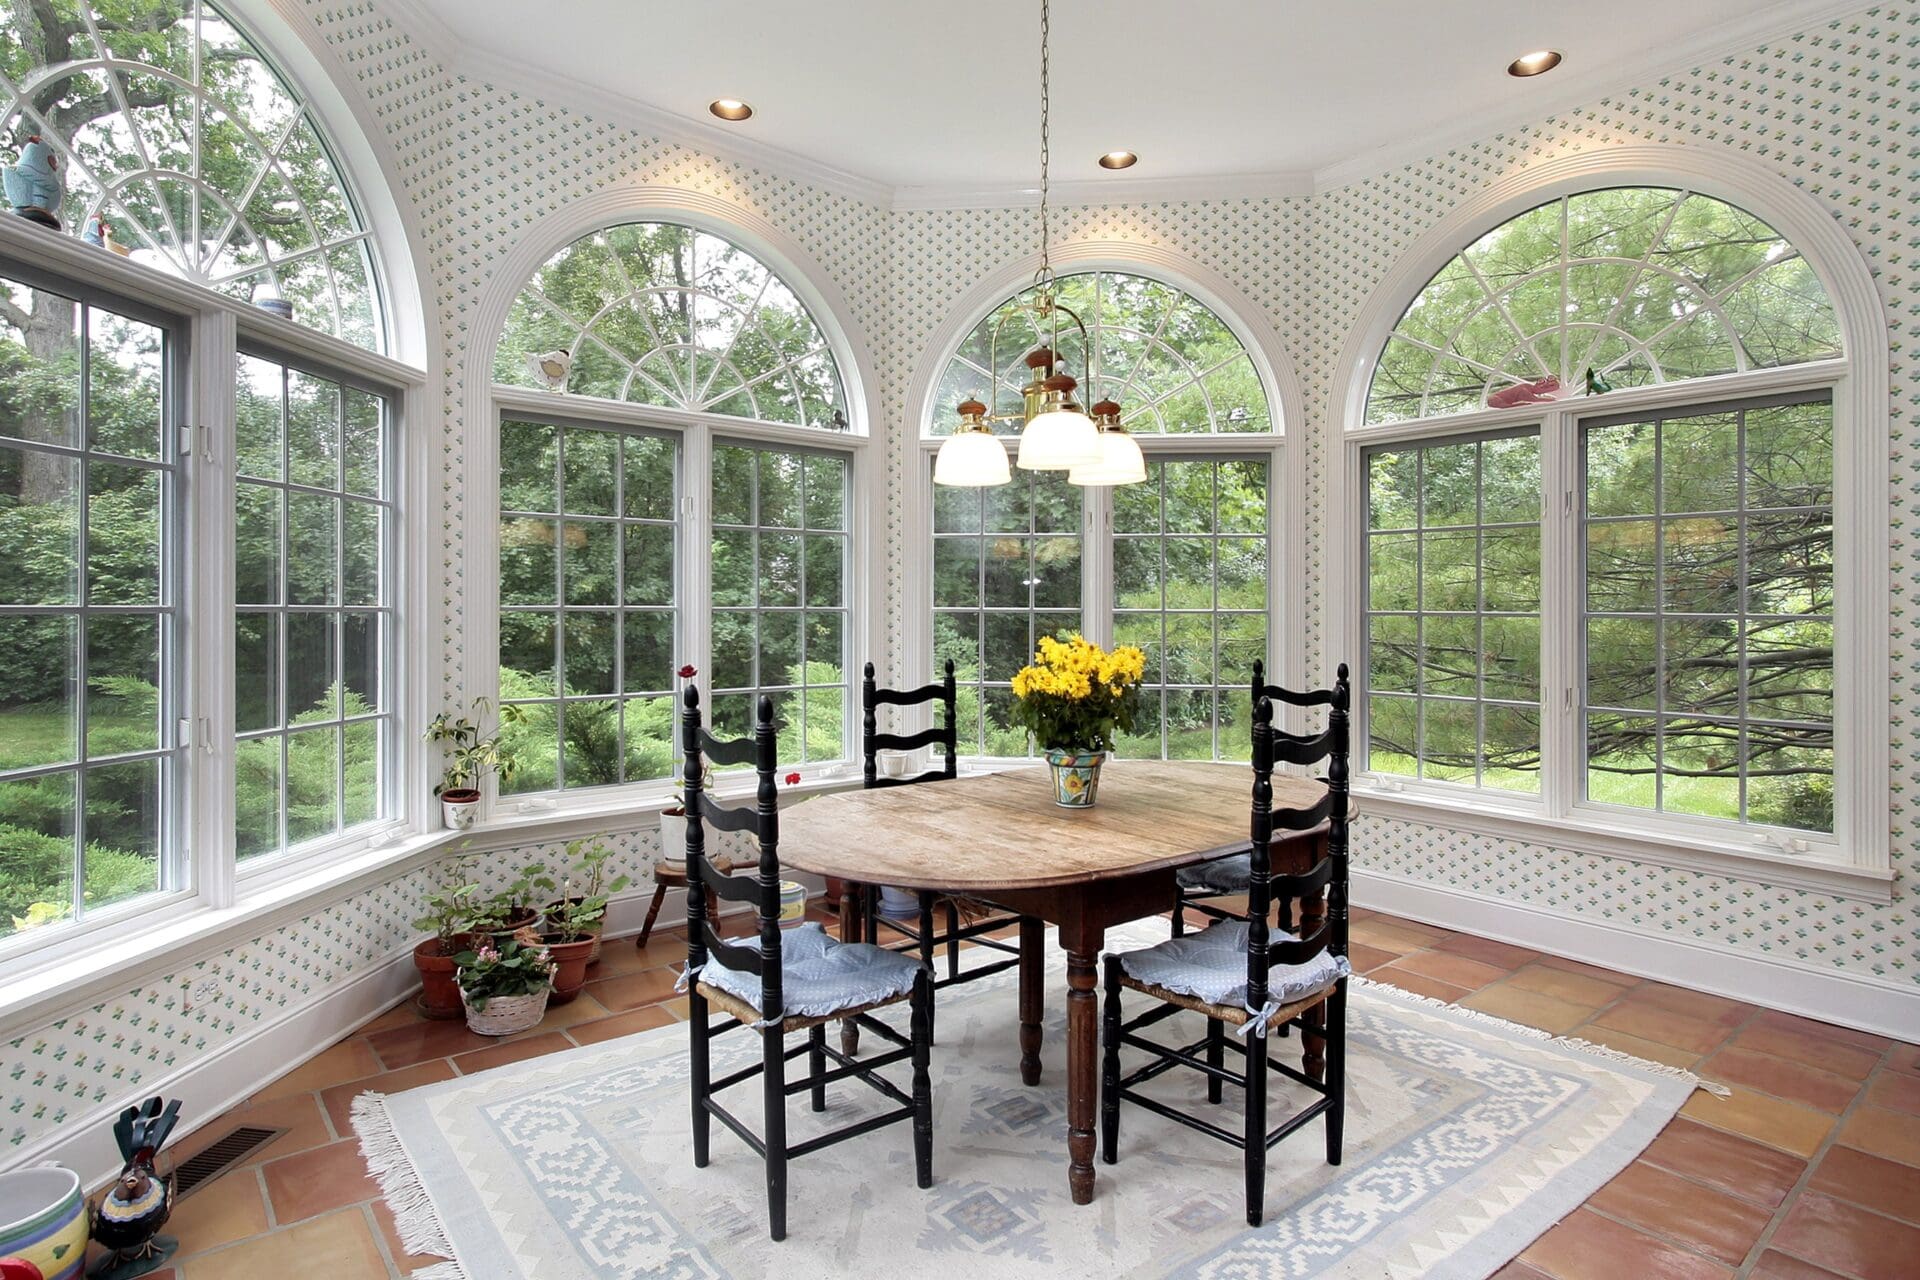 Eating area with large round picture windows